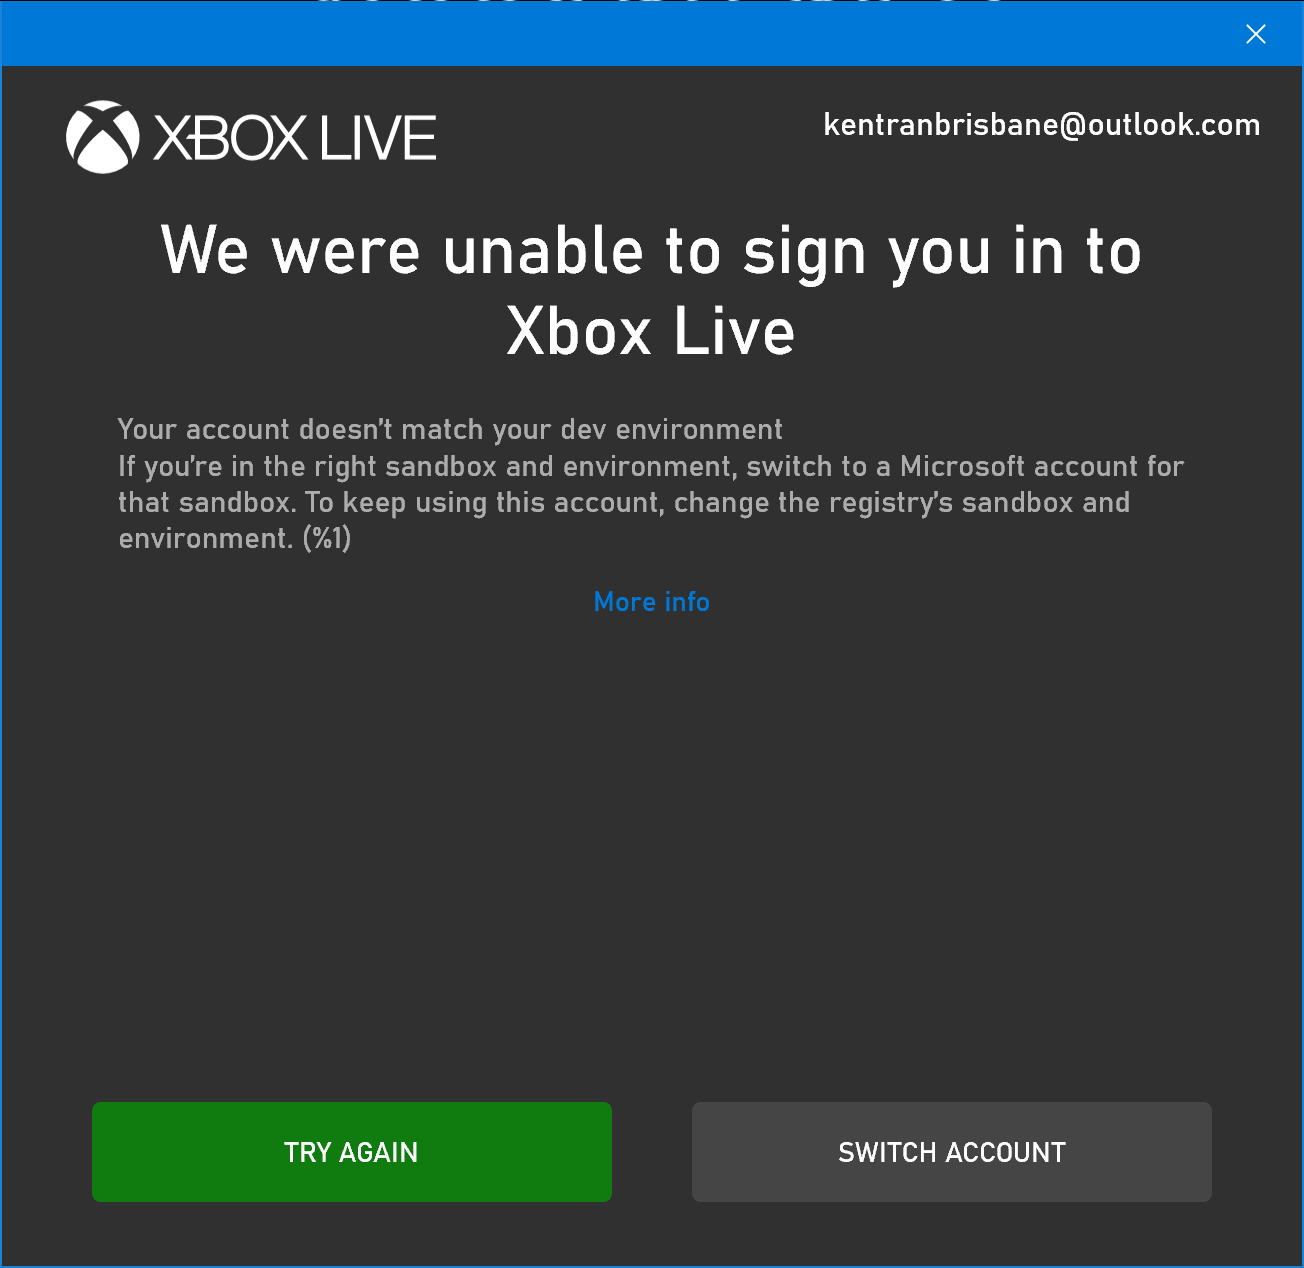 Xbox is down worldwide with users unable to play games